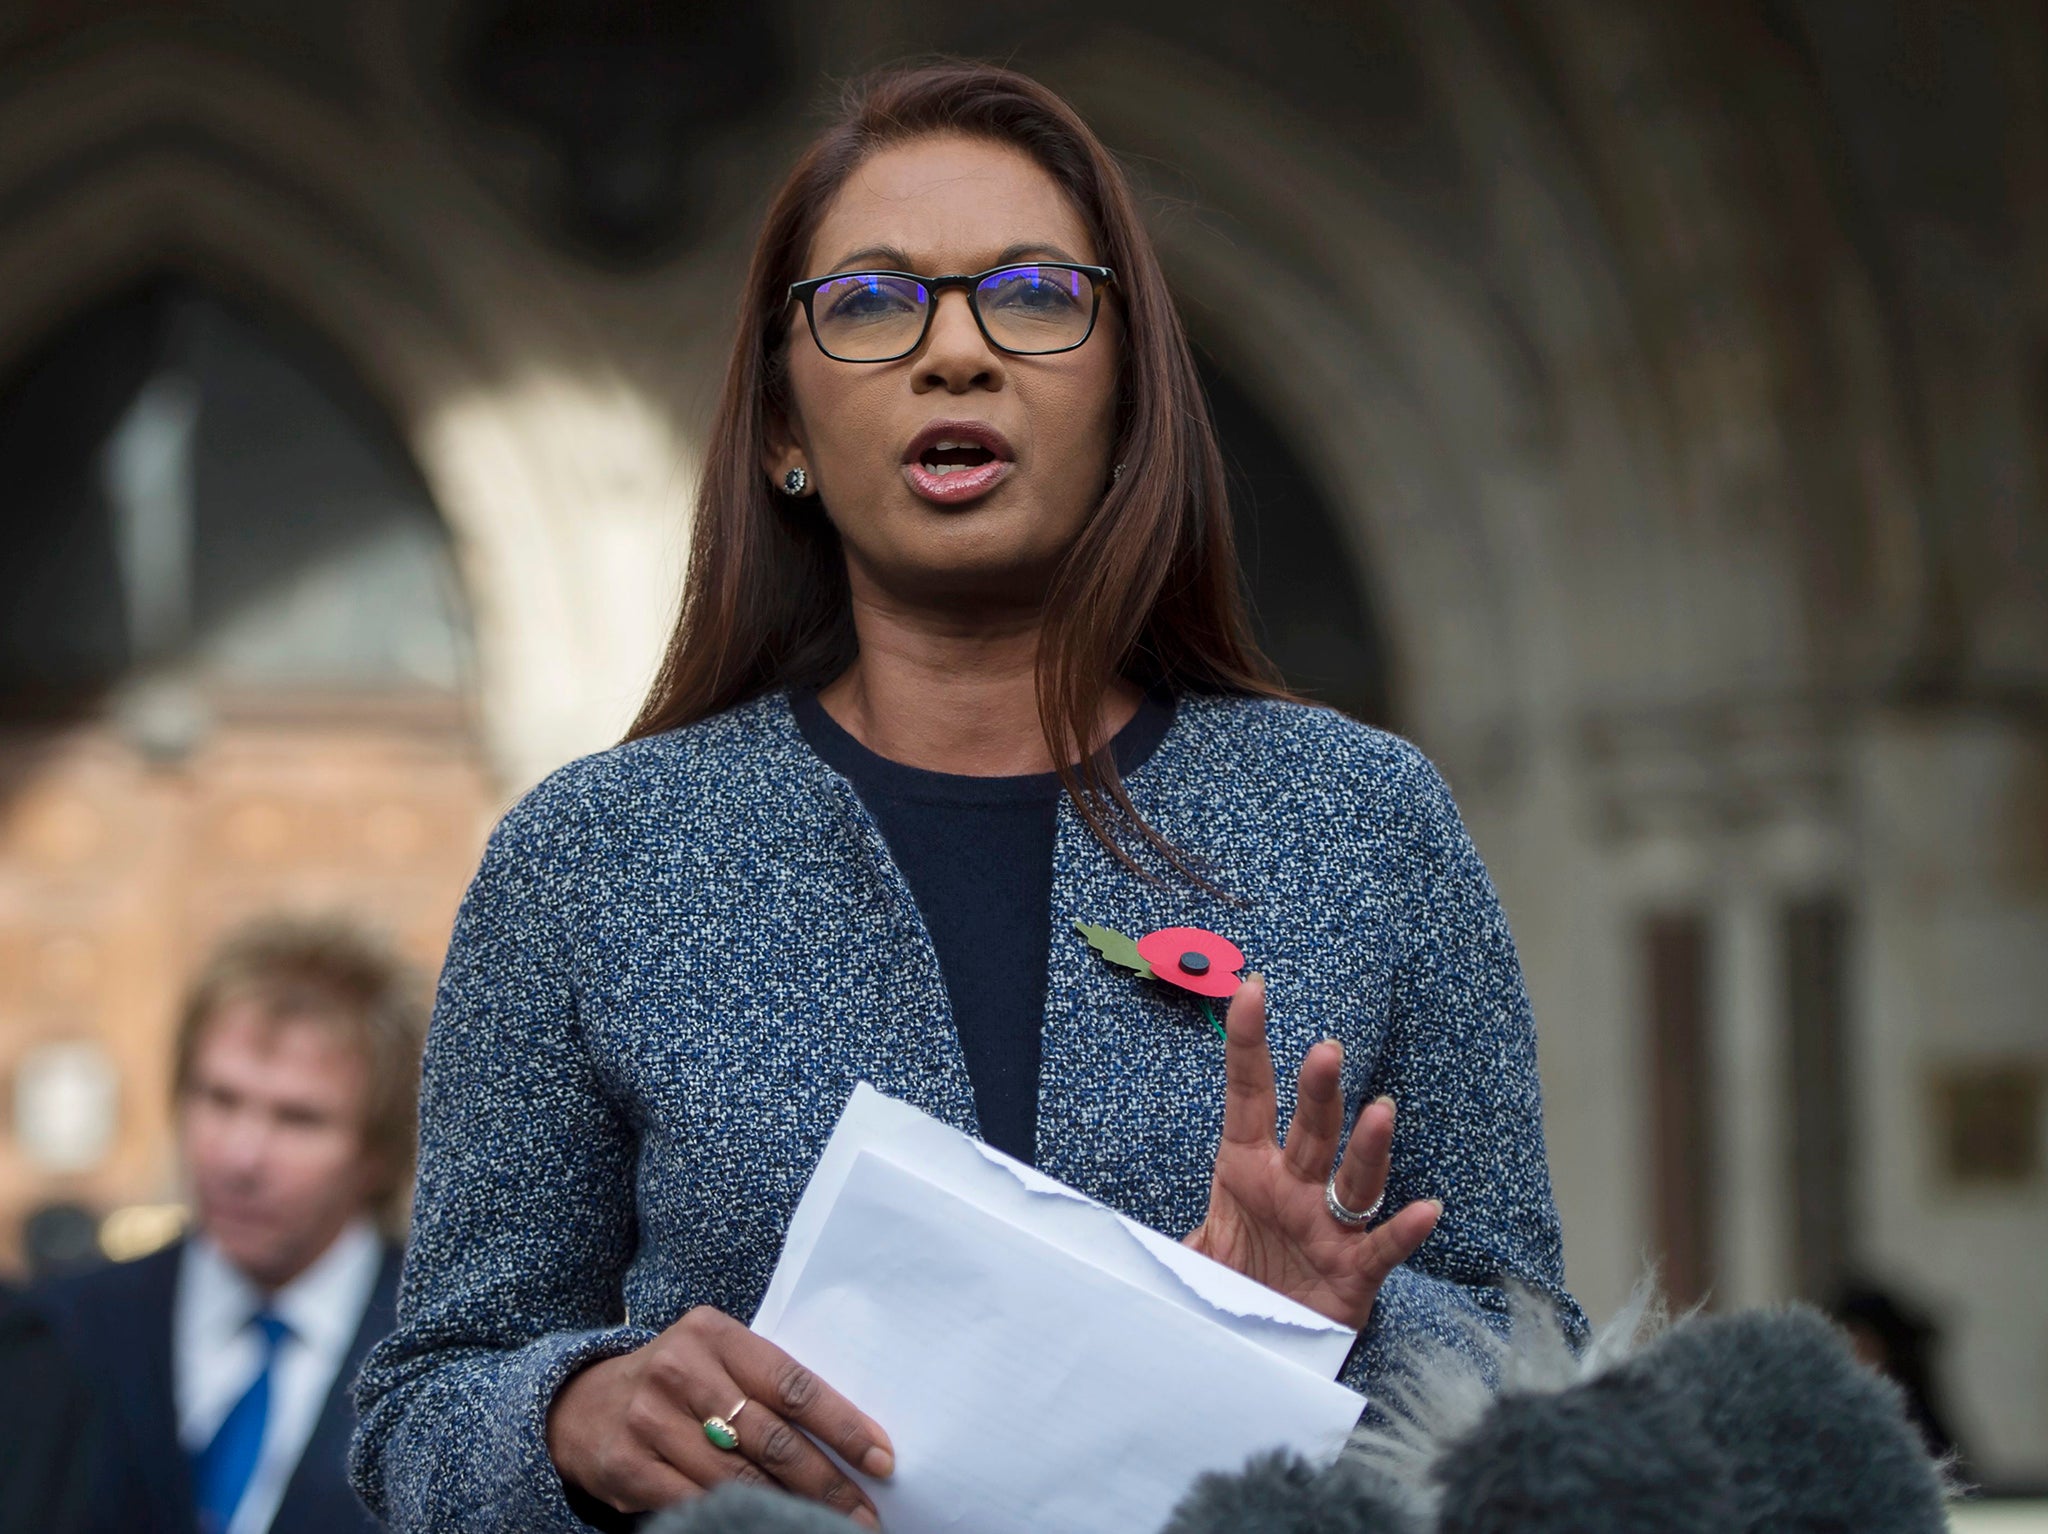 Gina Miller challenged the Government over Article 50 in a high-profile court case. She argues that the formal process for withdrawing from the EU was never designed to be used